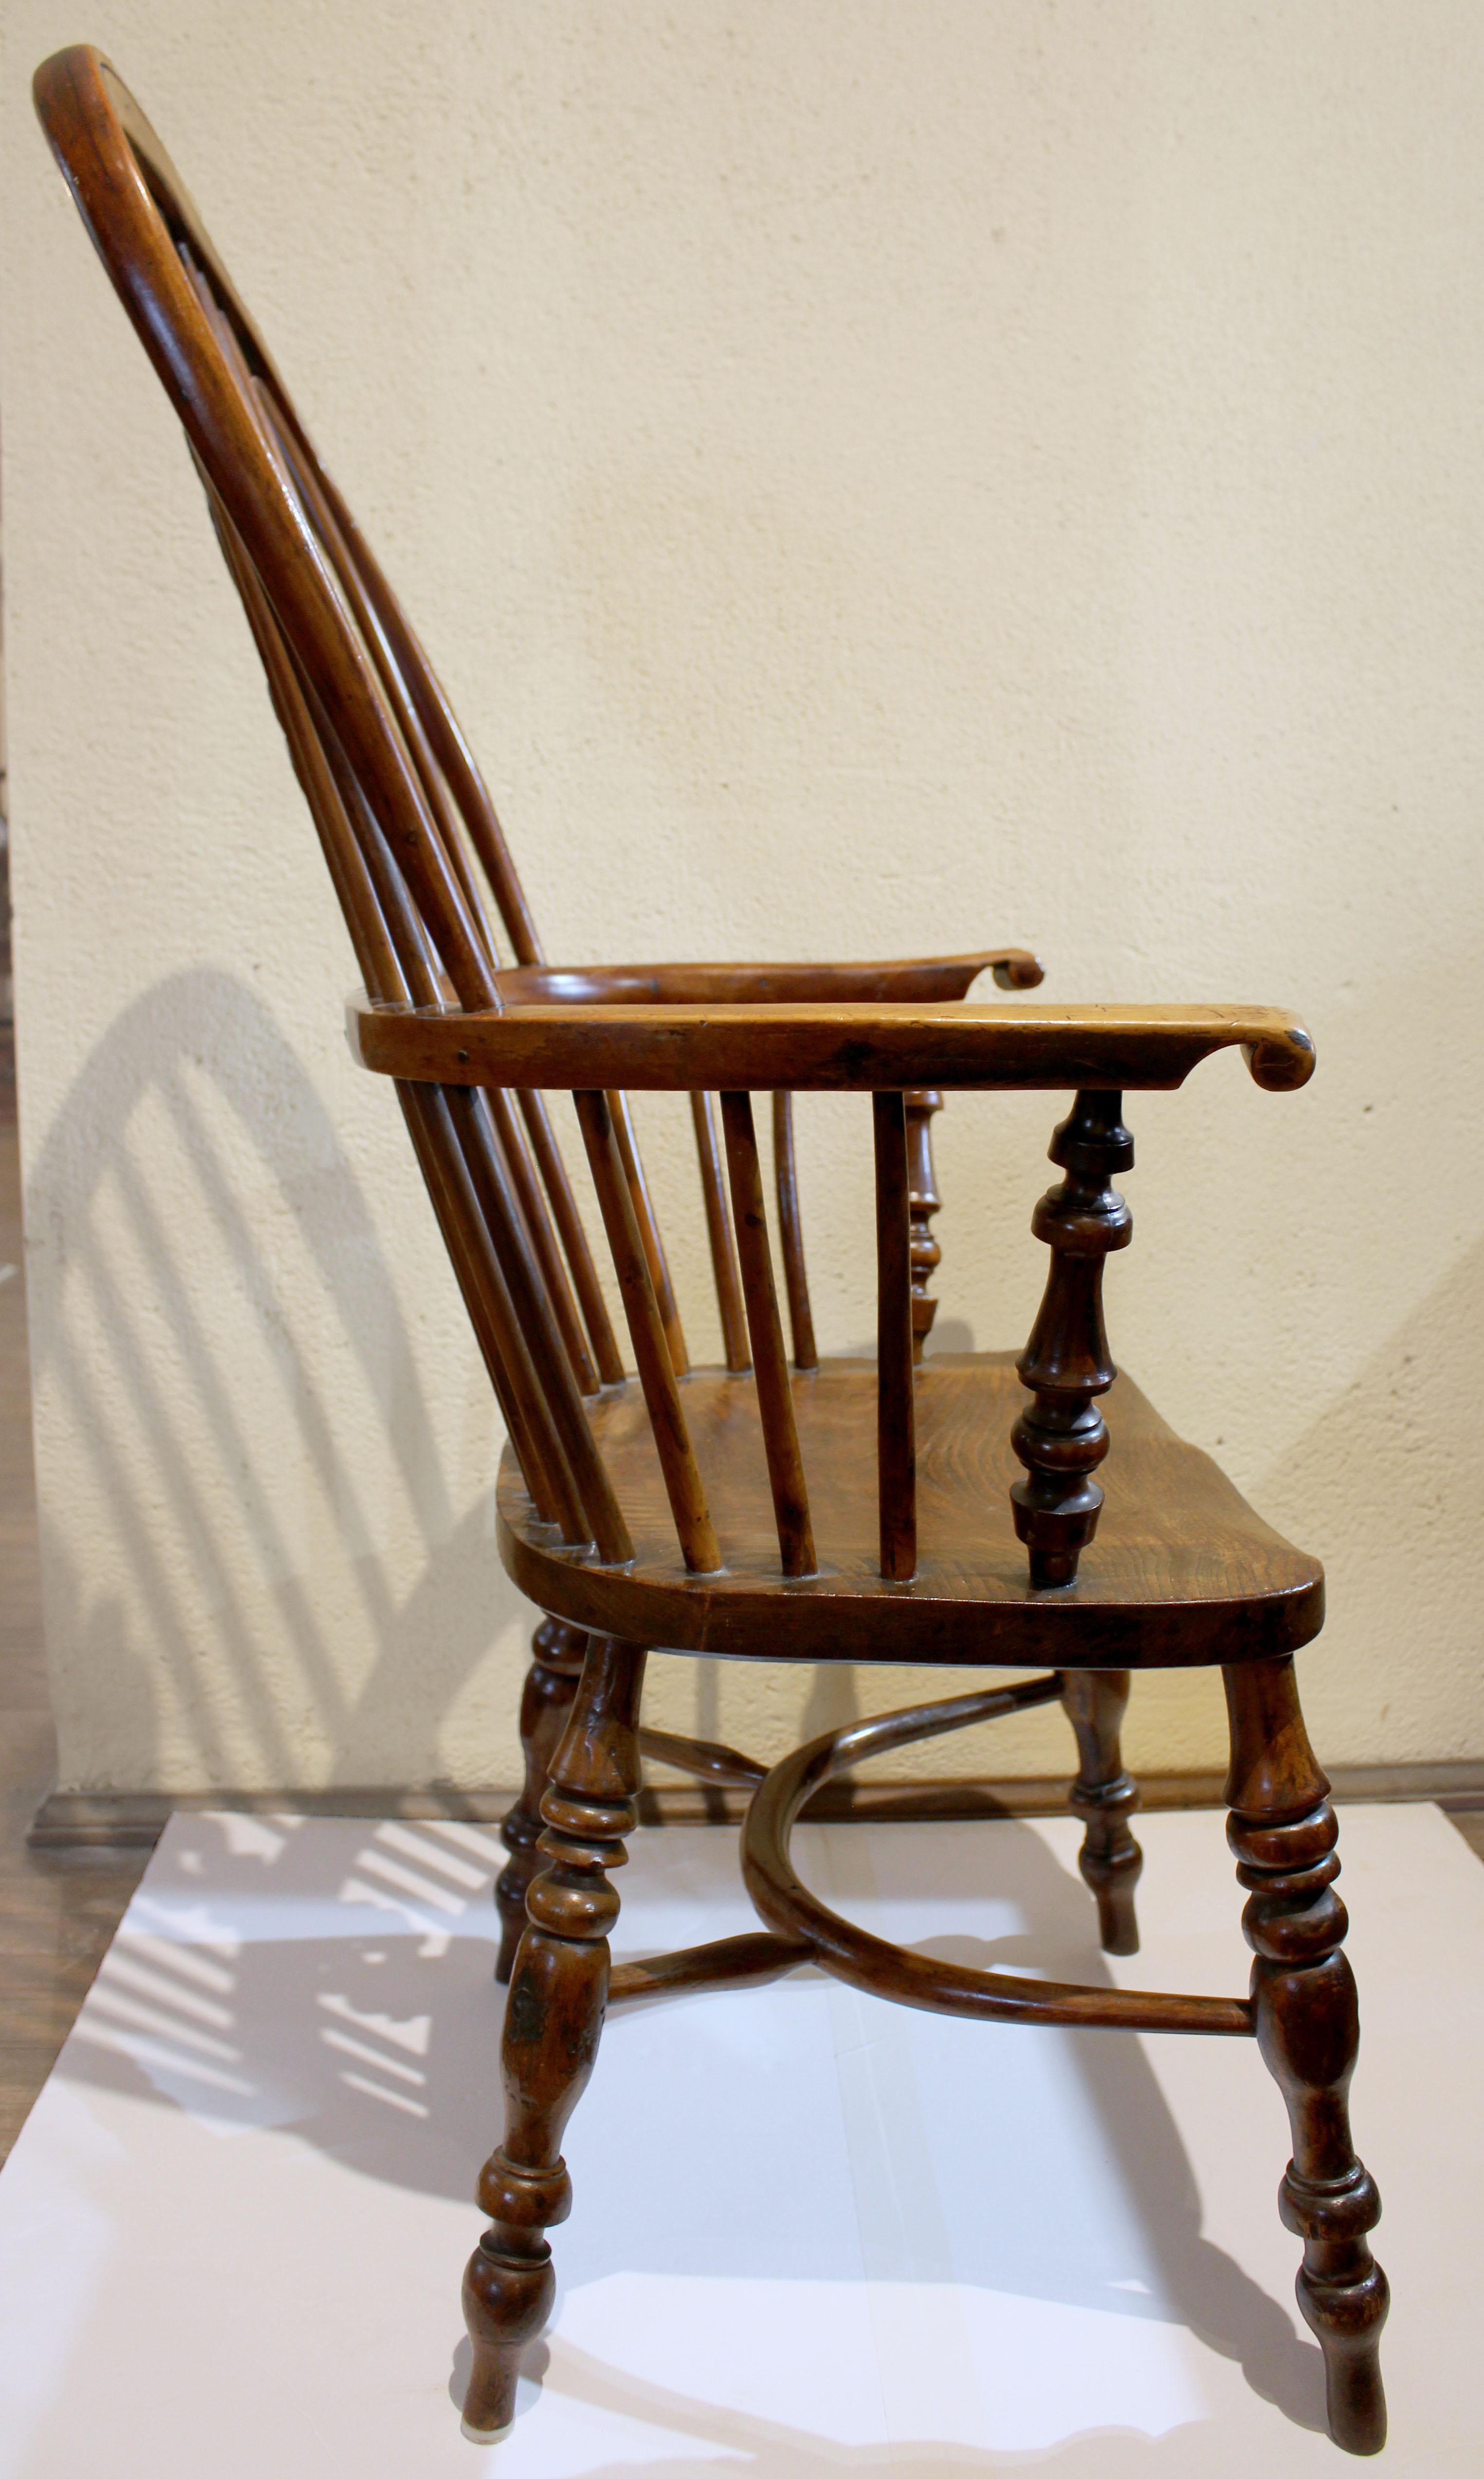 Circa 1830 English High Back Windsor Arm Chair, Yew Wood In Good Condition For Sale In Chapel Hill, NC